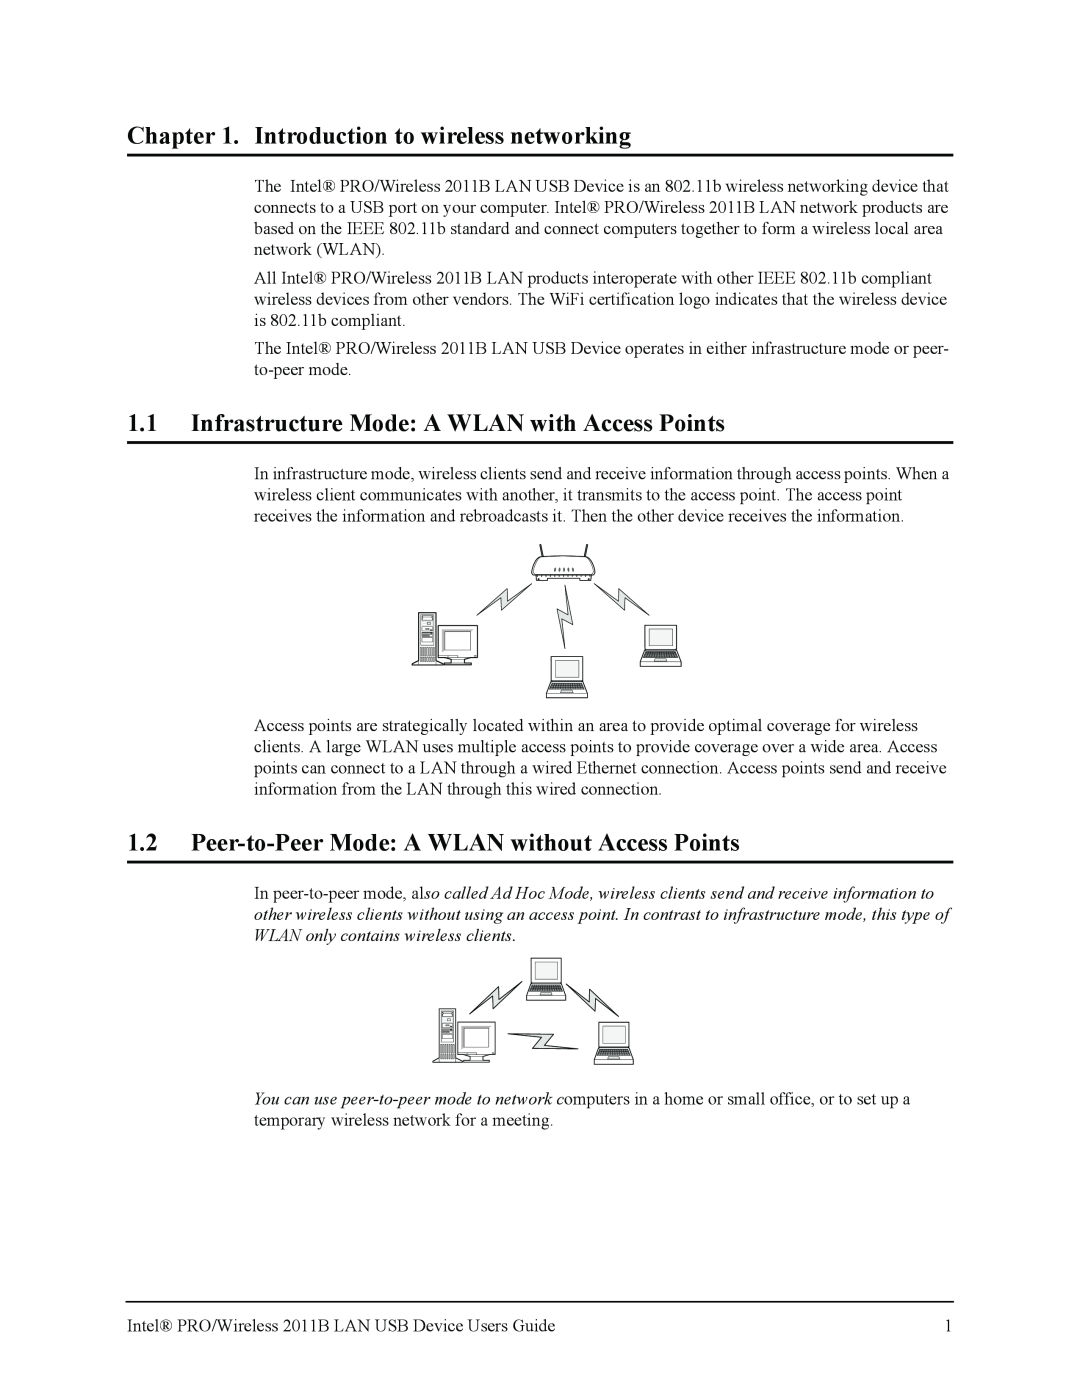 Intel 2011B manual Introduction to wireless networking, 1.1Infrastructure Mode A WLAN with Access Points 